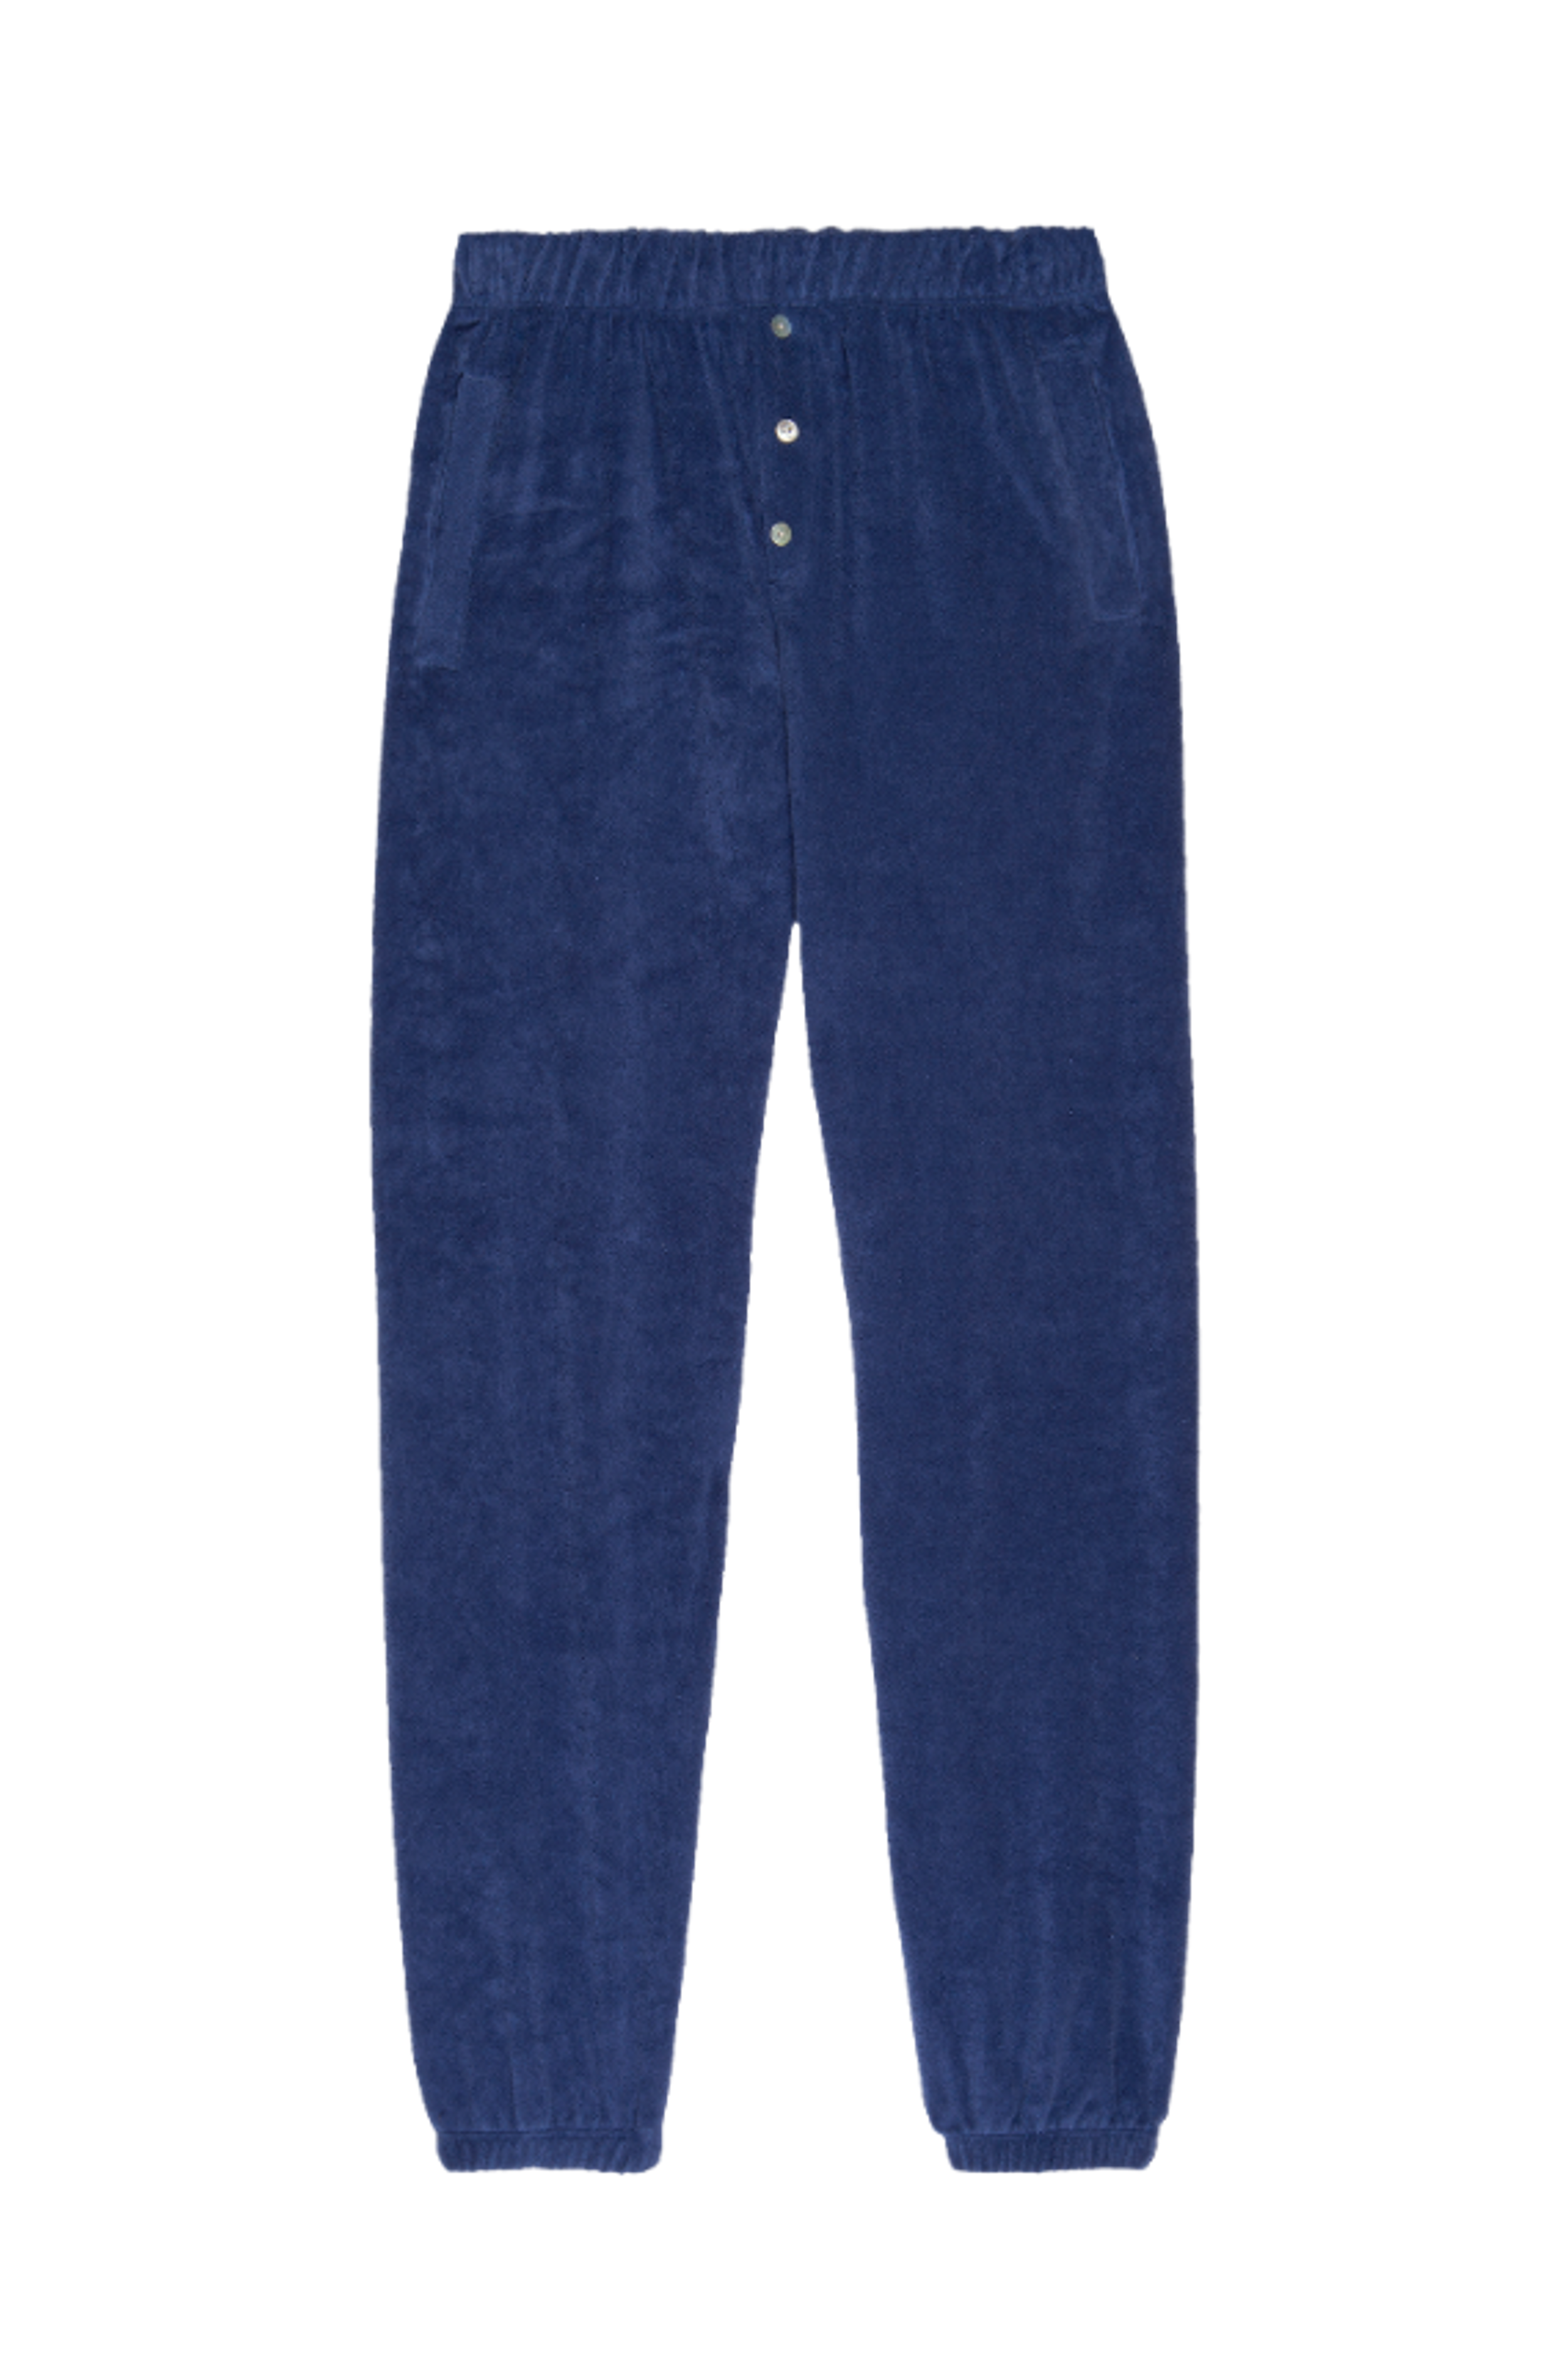 The Terry Henley Sweatpants